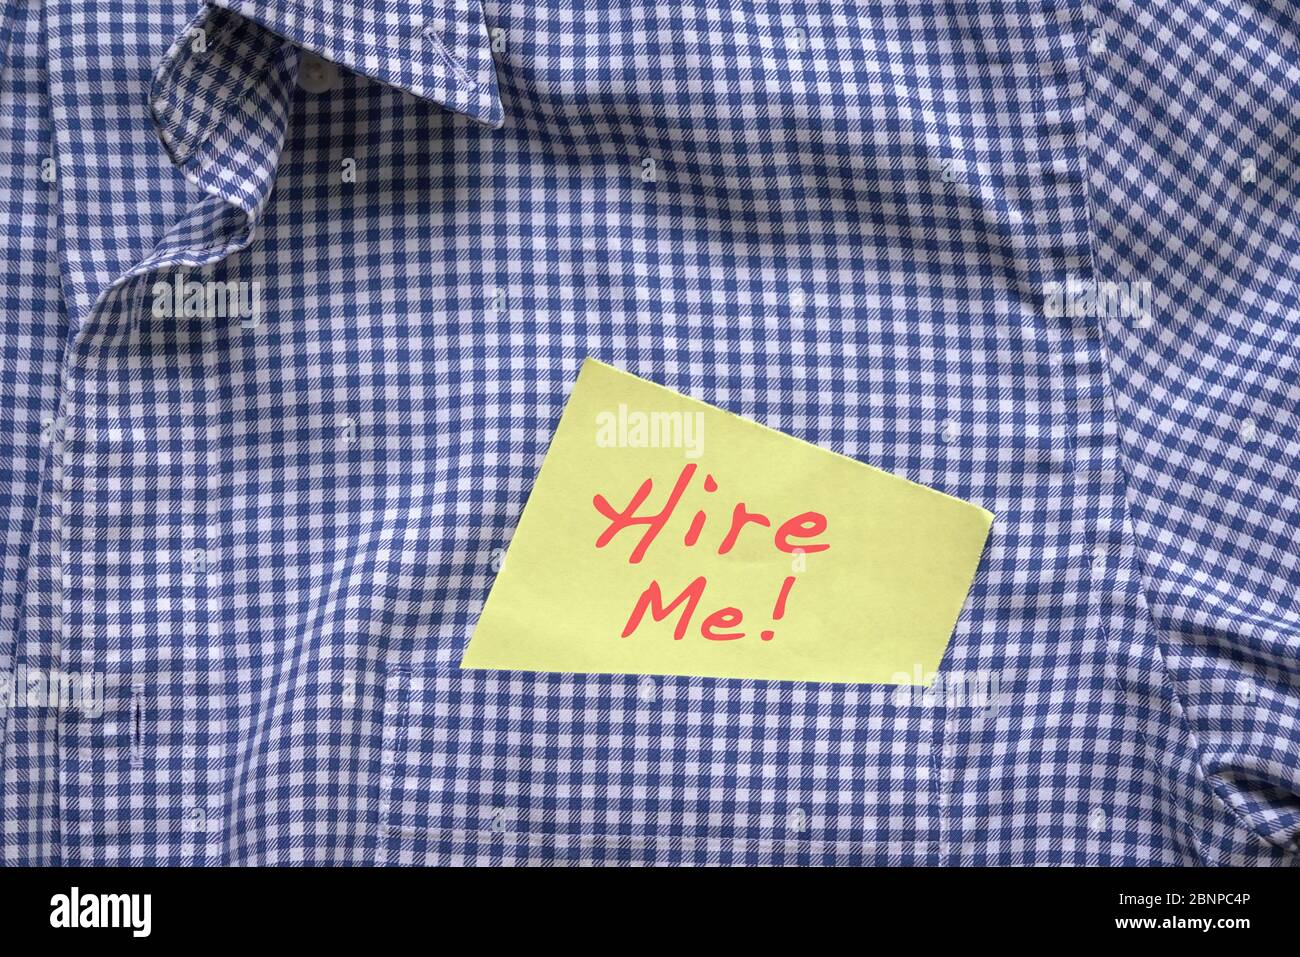 Hire me, words in red on a yellow paper stuck out from blue shirt pocket. Employment concept. Stock Photo